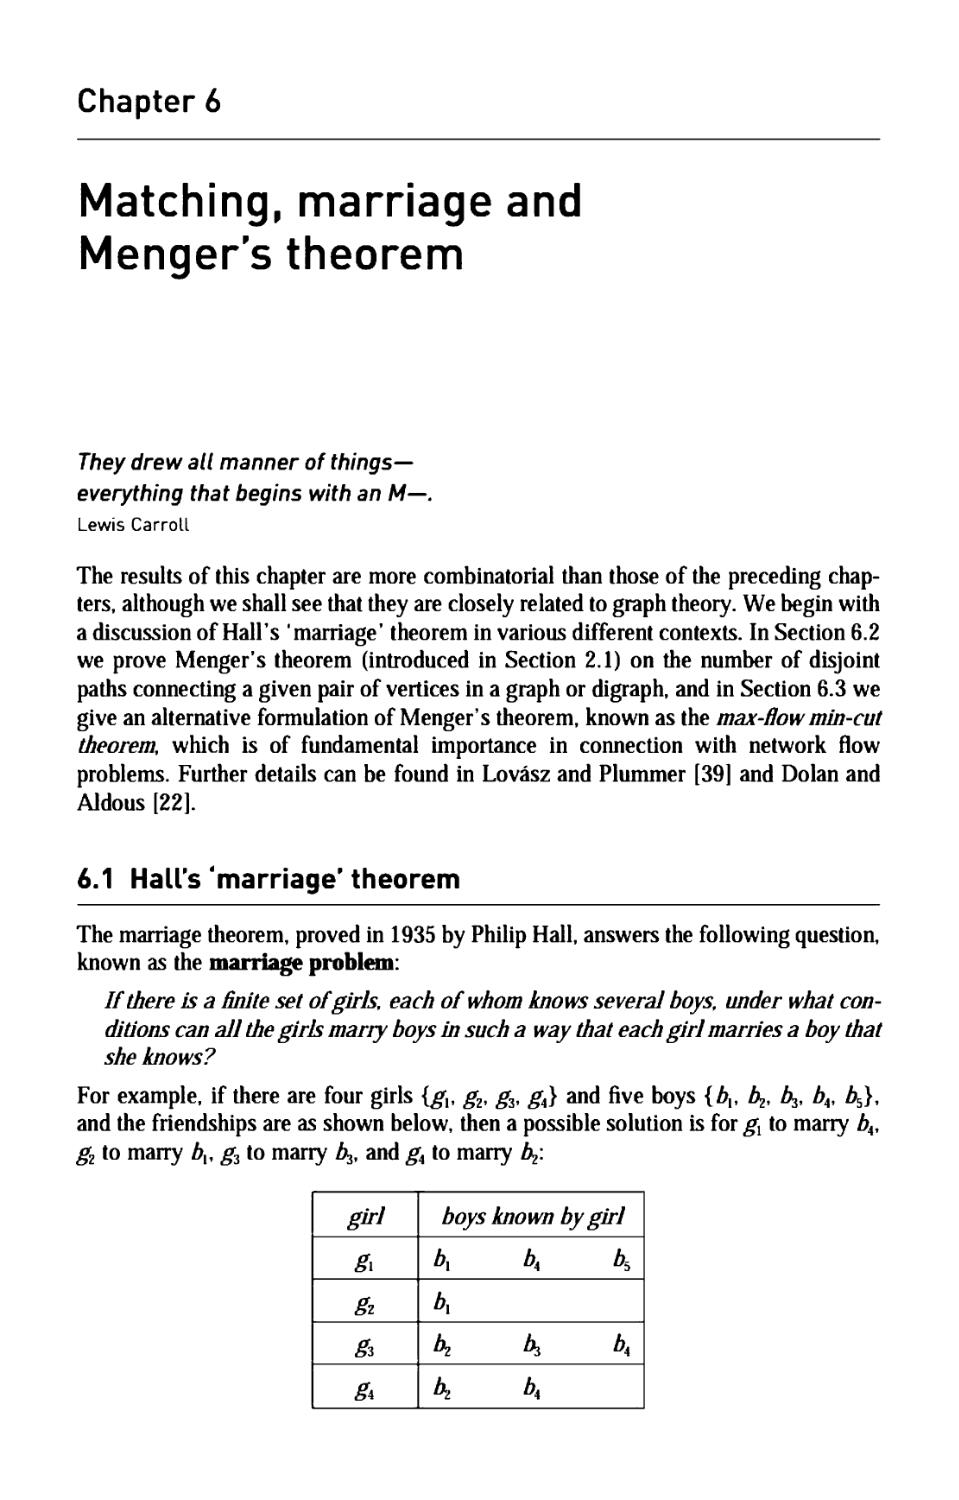 6 Matching, marriage and Menger's theorem